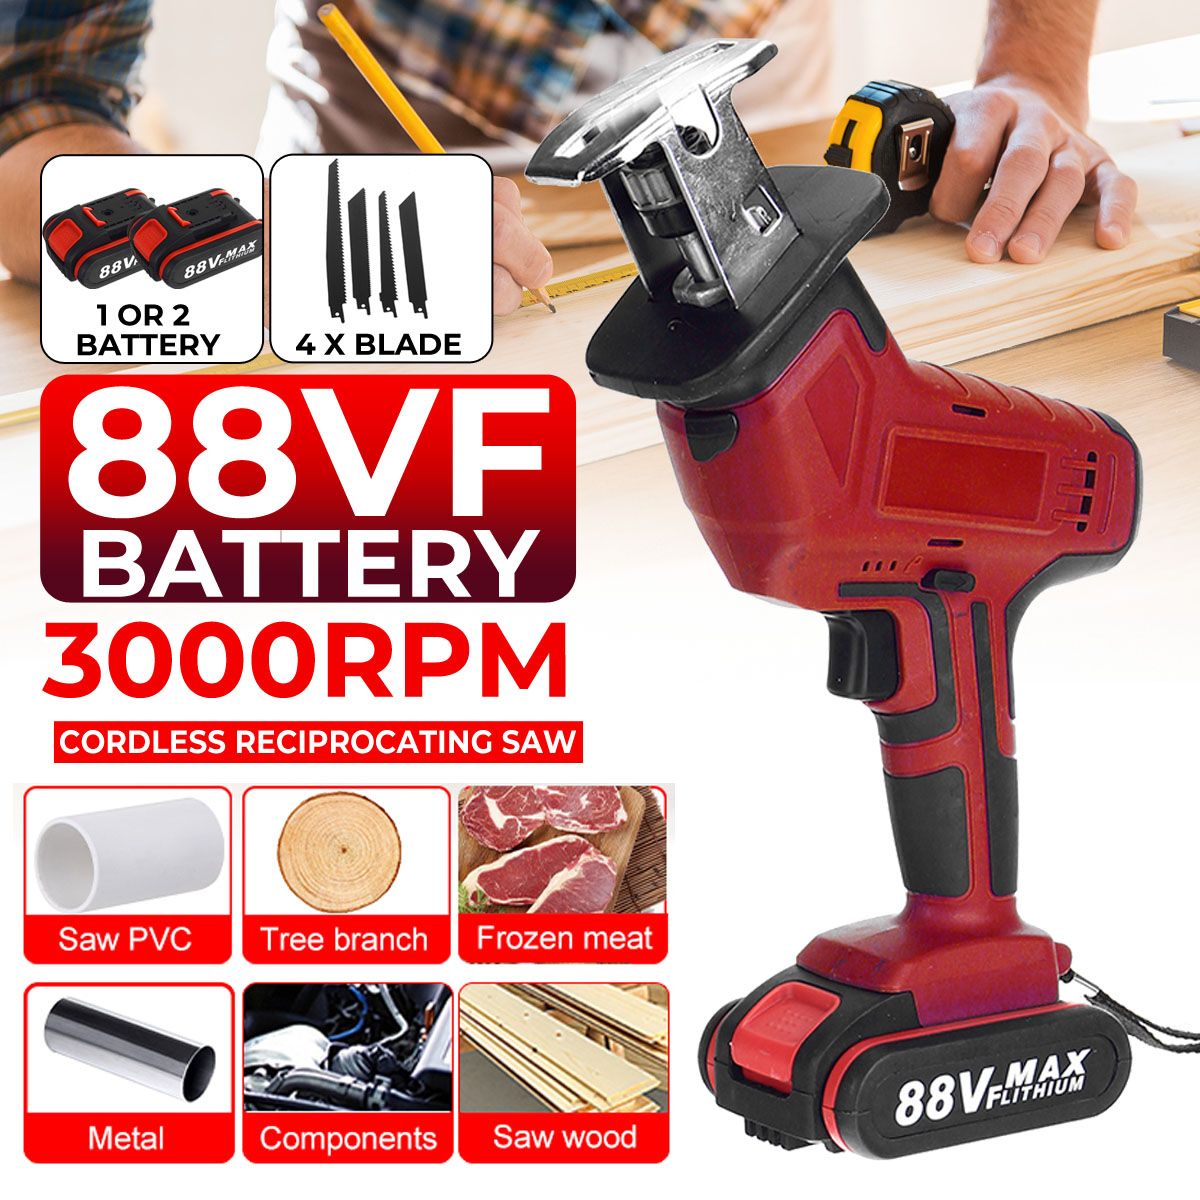 3000RPM-88VF-Electric-Saw-Rechargeable-Reciprocating-Saw-Wood-Branches-Metal-Plastic-Cutter-For-WORX-1762416